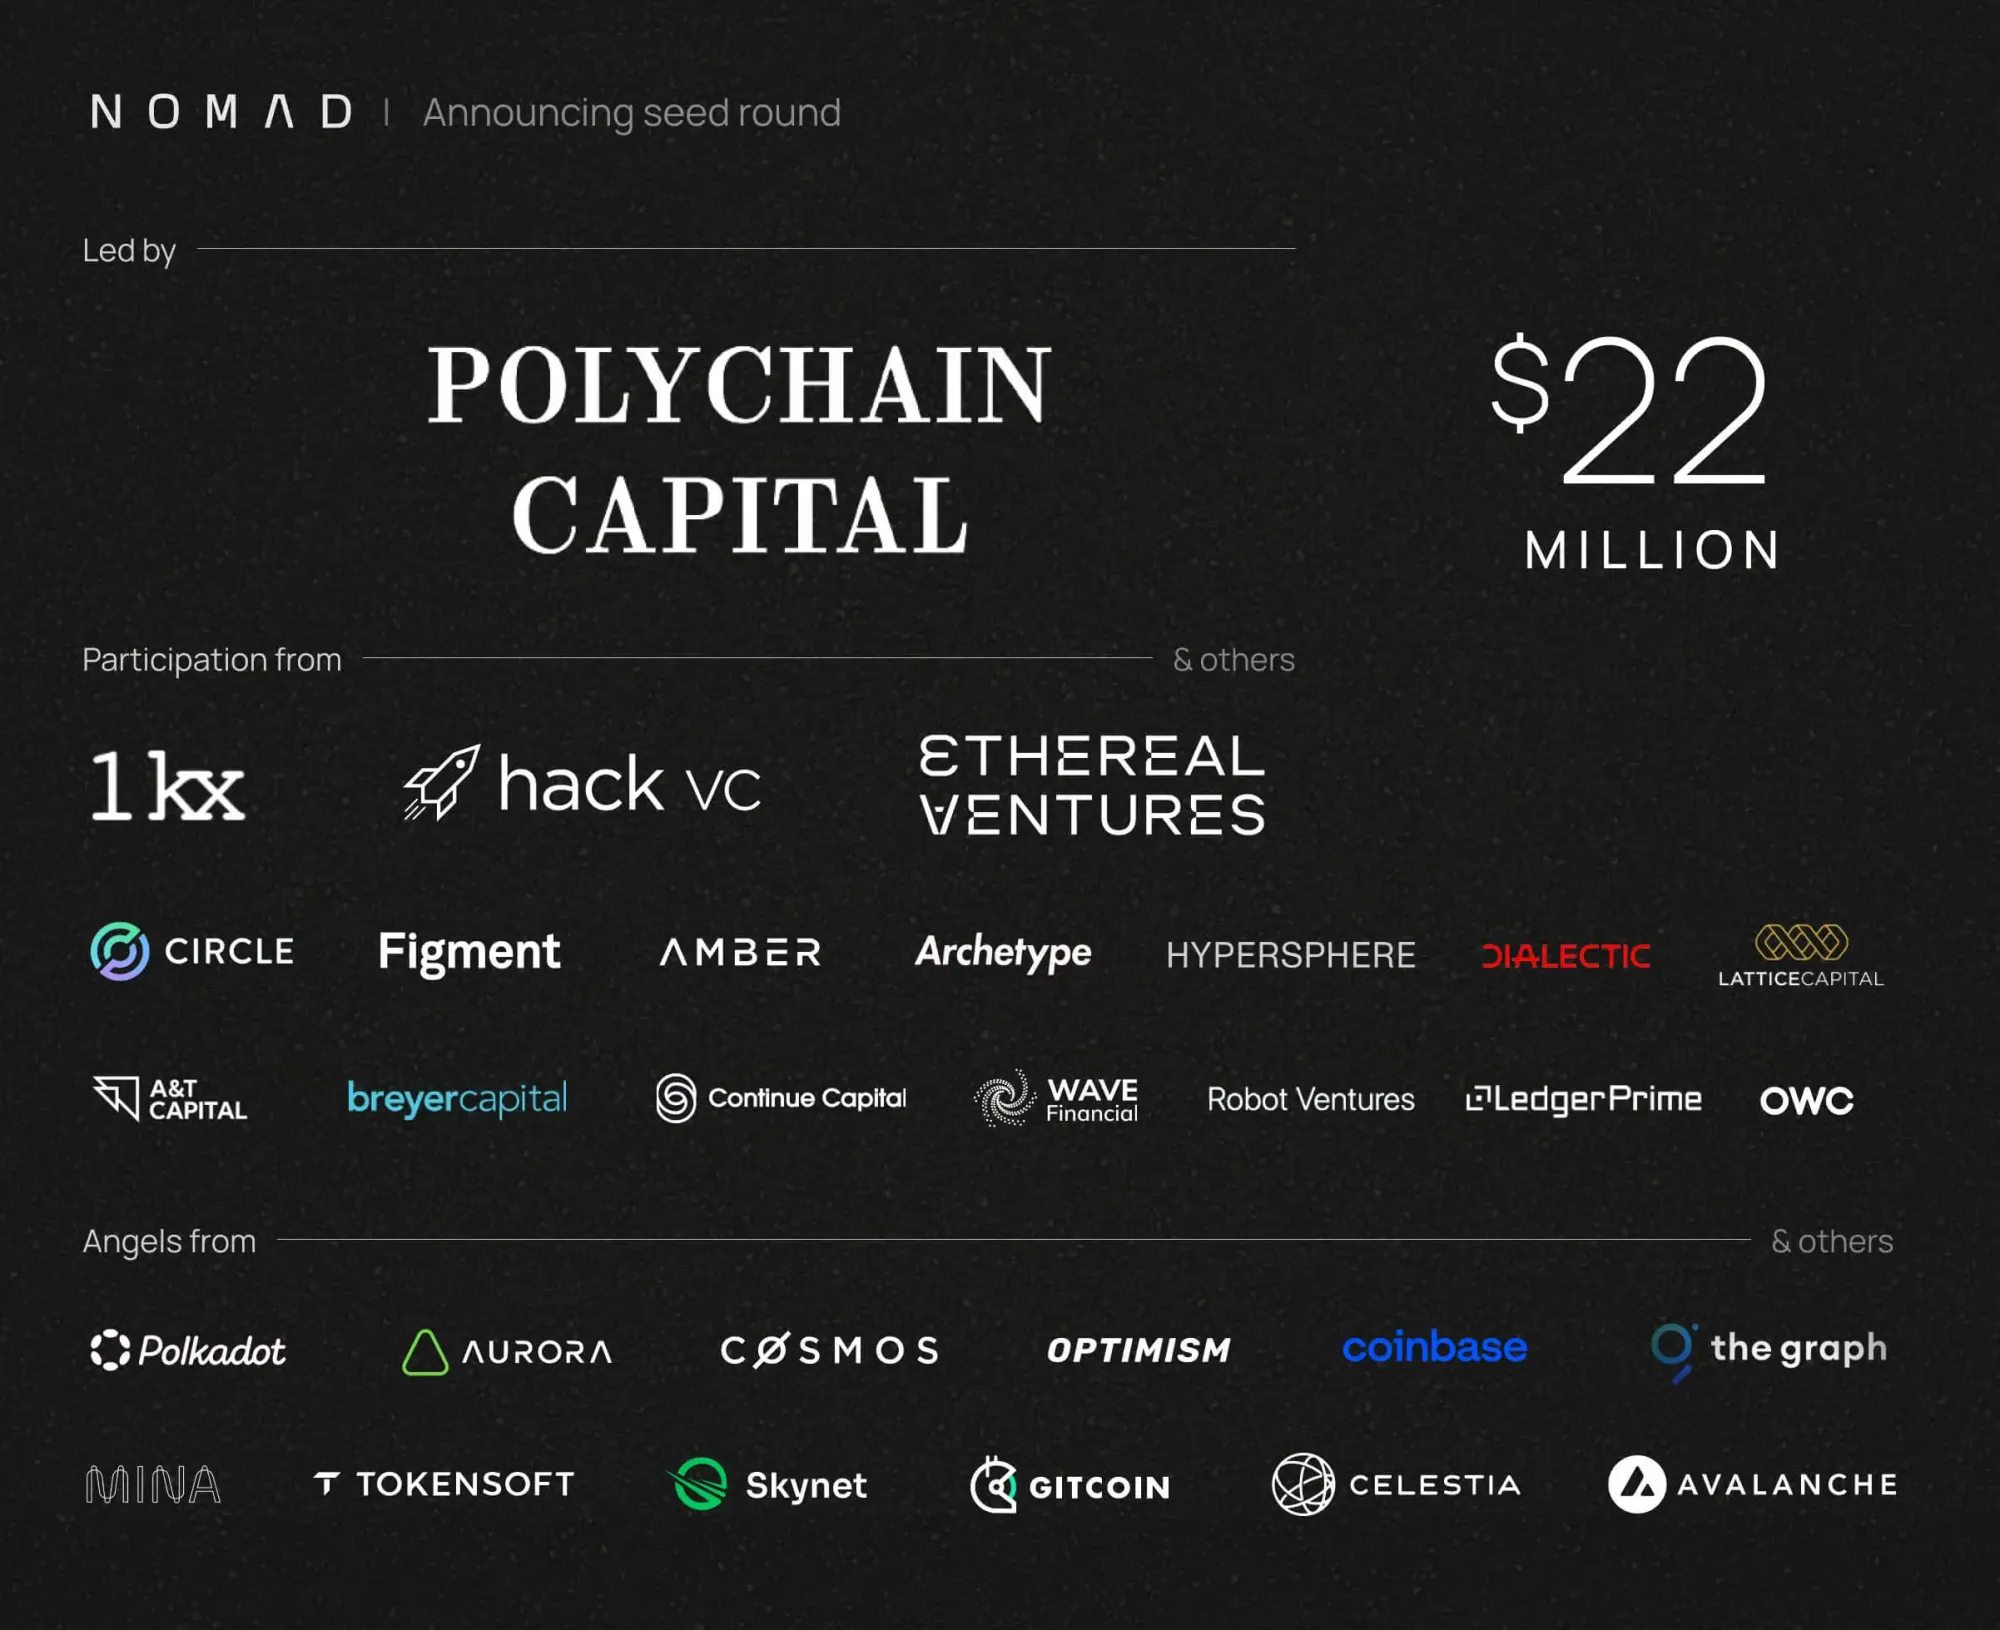 Nomad's $22M seed round announcement